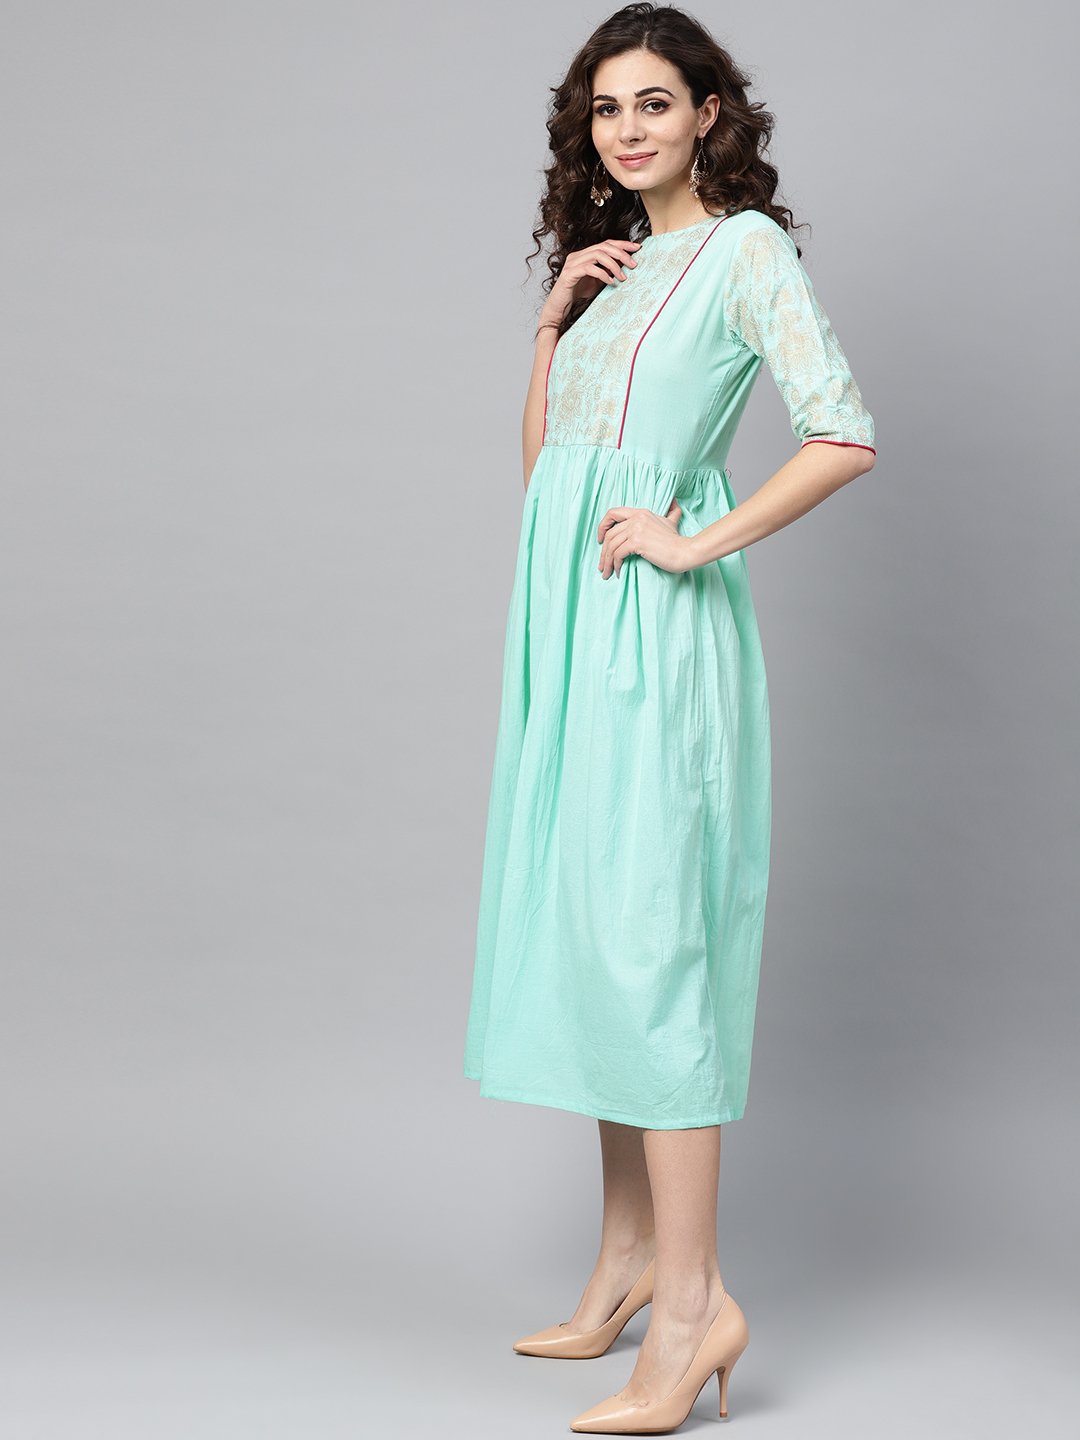 Women's Pastel Green Dress With Front Gold Printed Yoke & 3/4 Sleeves - Nayo Clothing